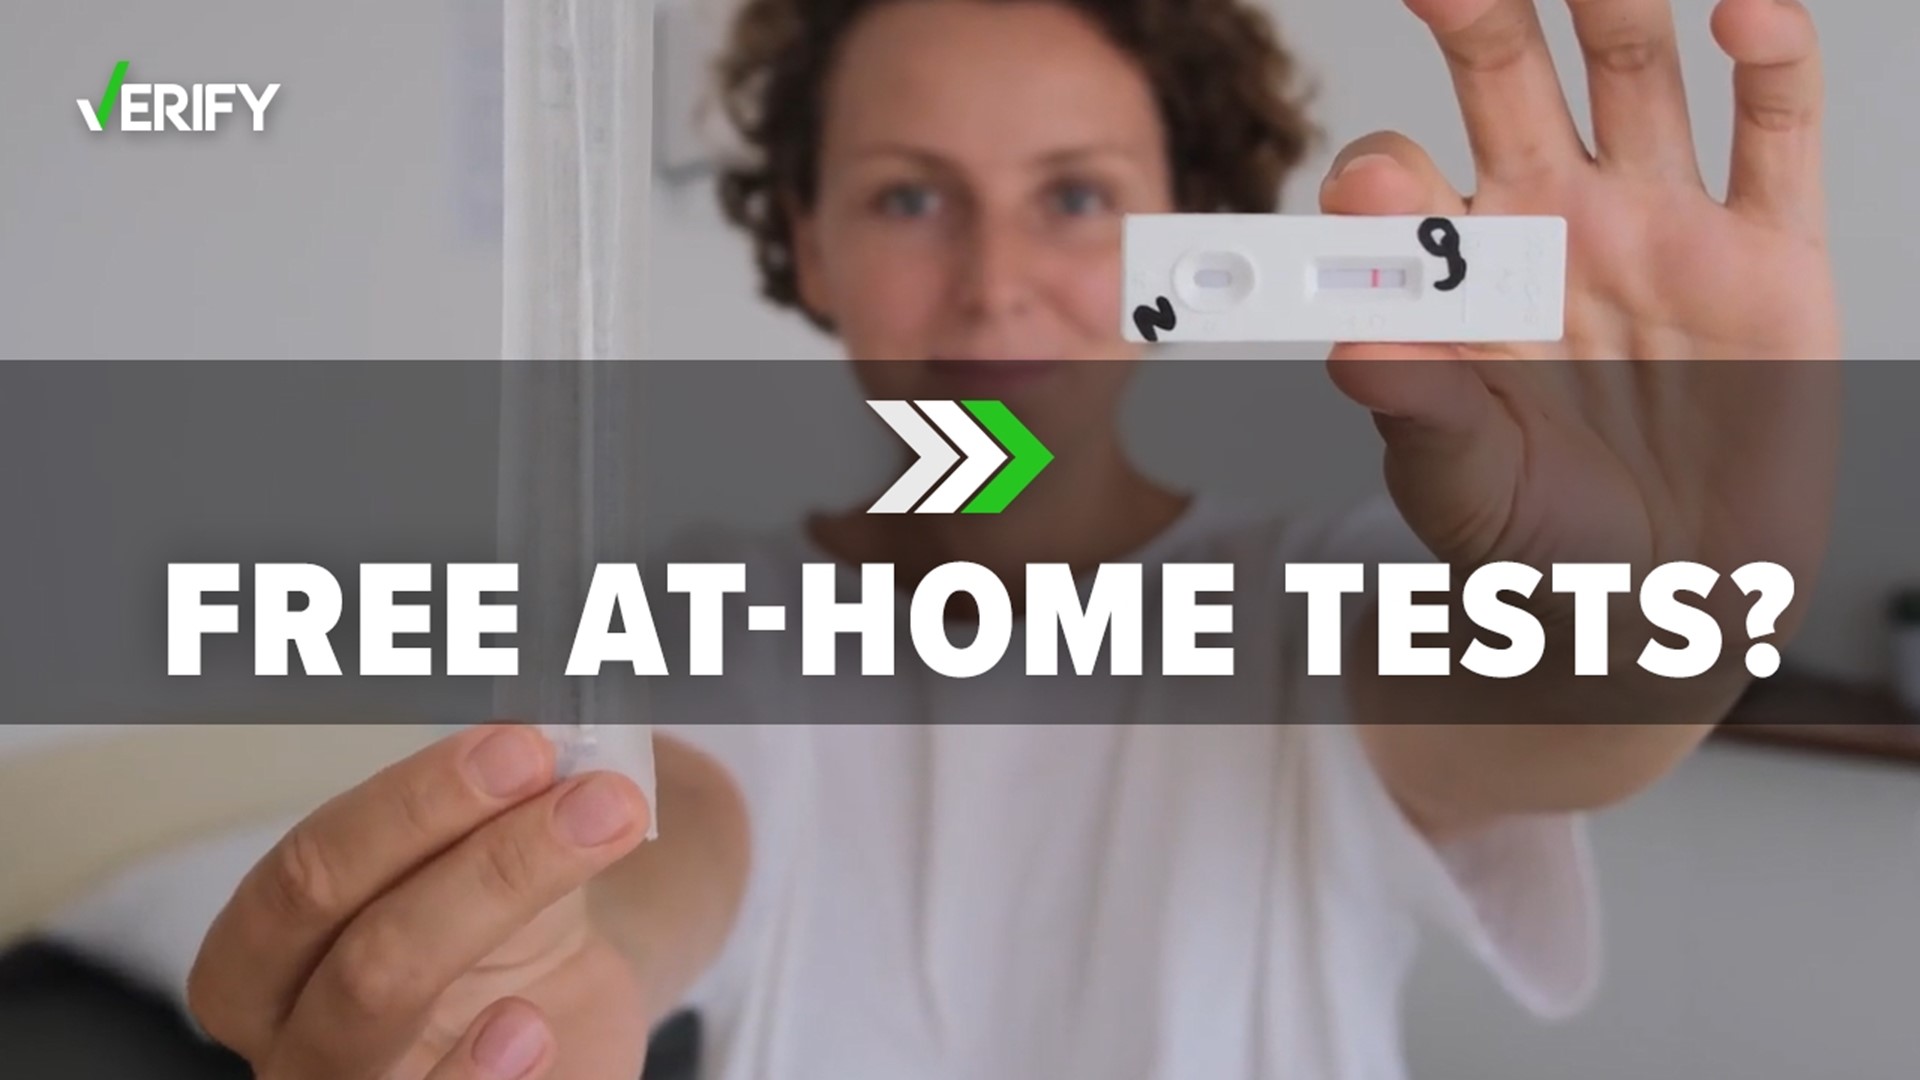 President Biden promised to supply free at-home testing kits for Americans, but do you need to request the test to get one? The VERIFY team confirms this is true.